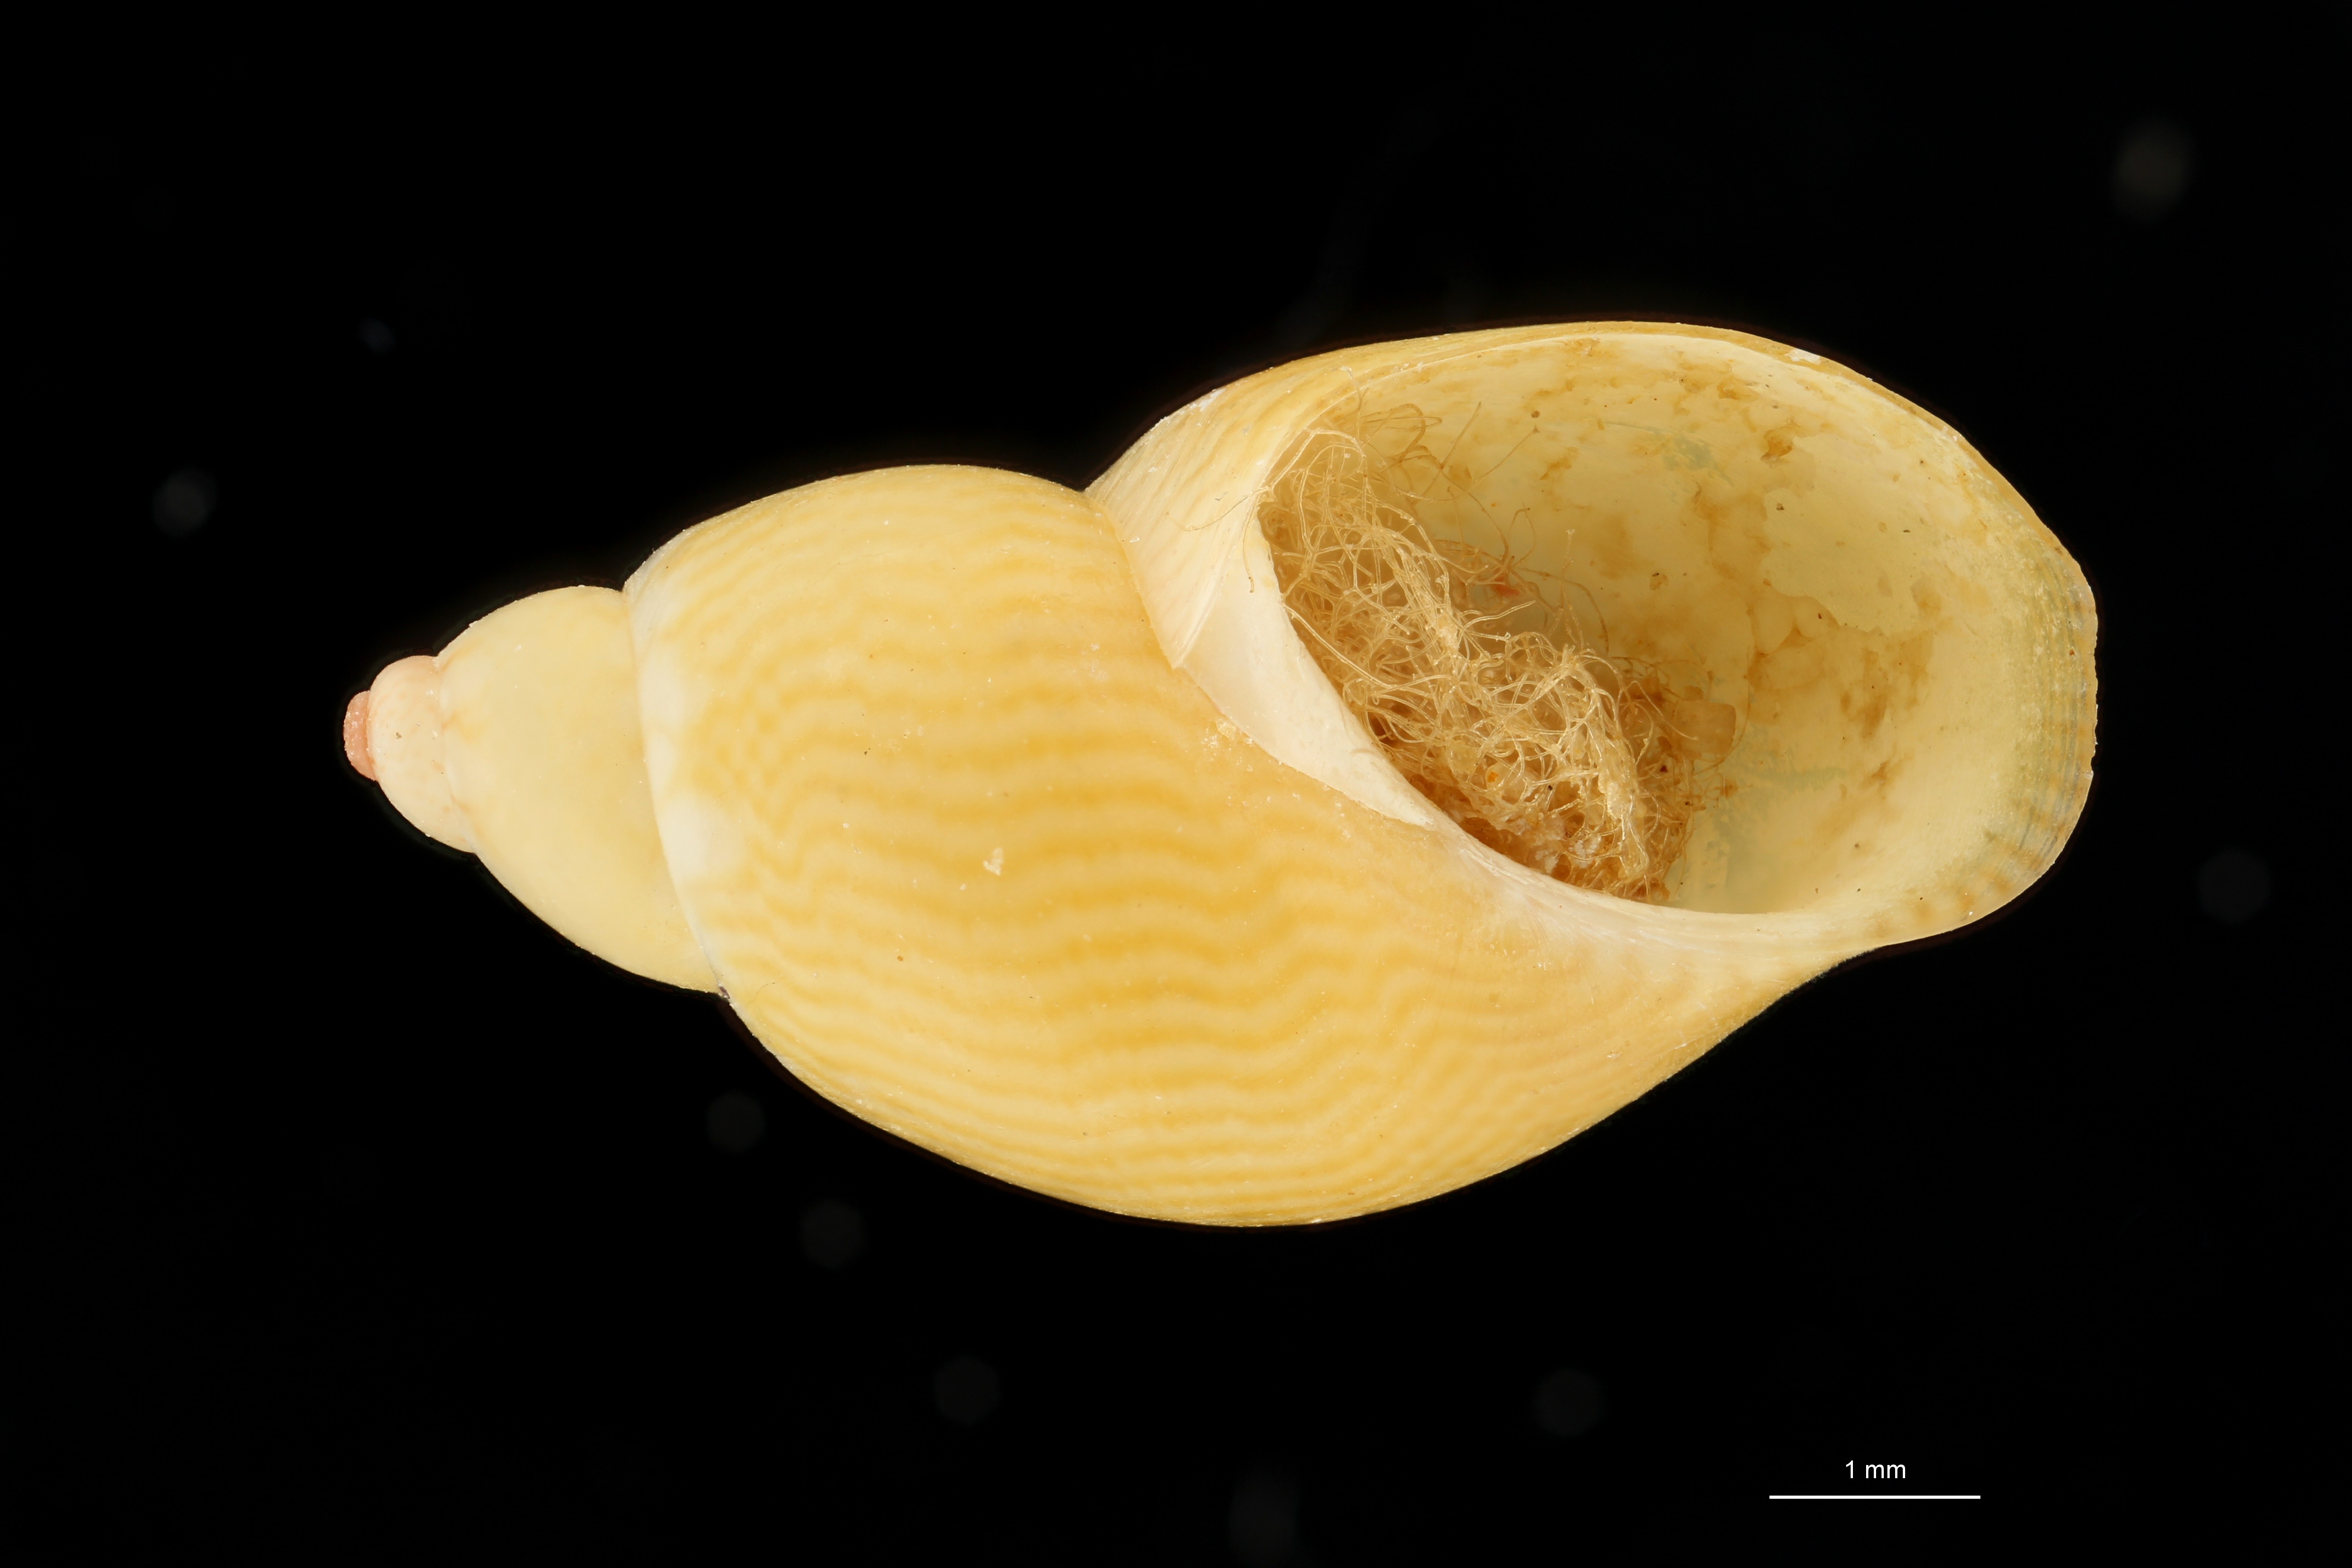 BE-RBINS-INV HOLOTYPE MT 38 Phasianella speciosa var. aurea VENTRAL ZS DMap Scaled.jpg